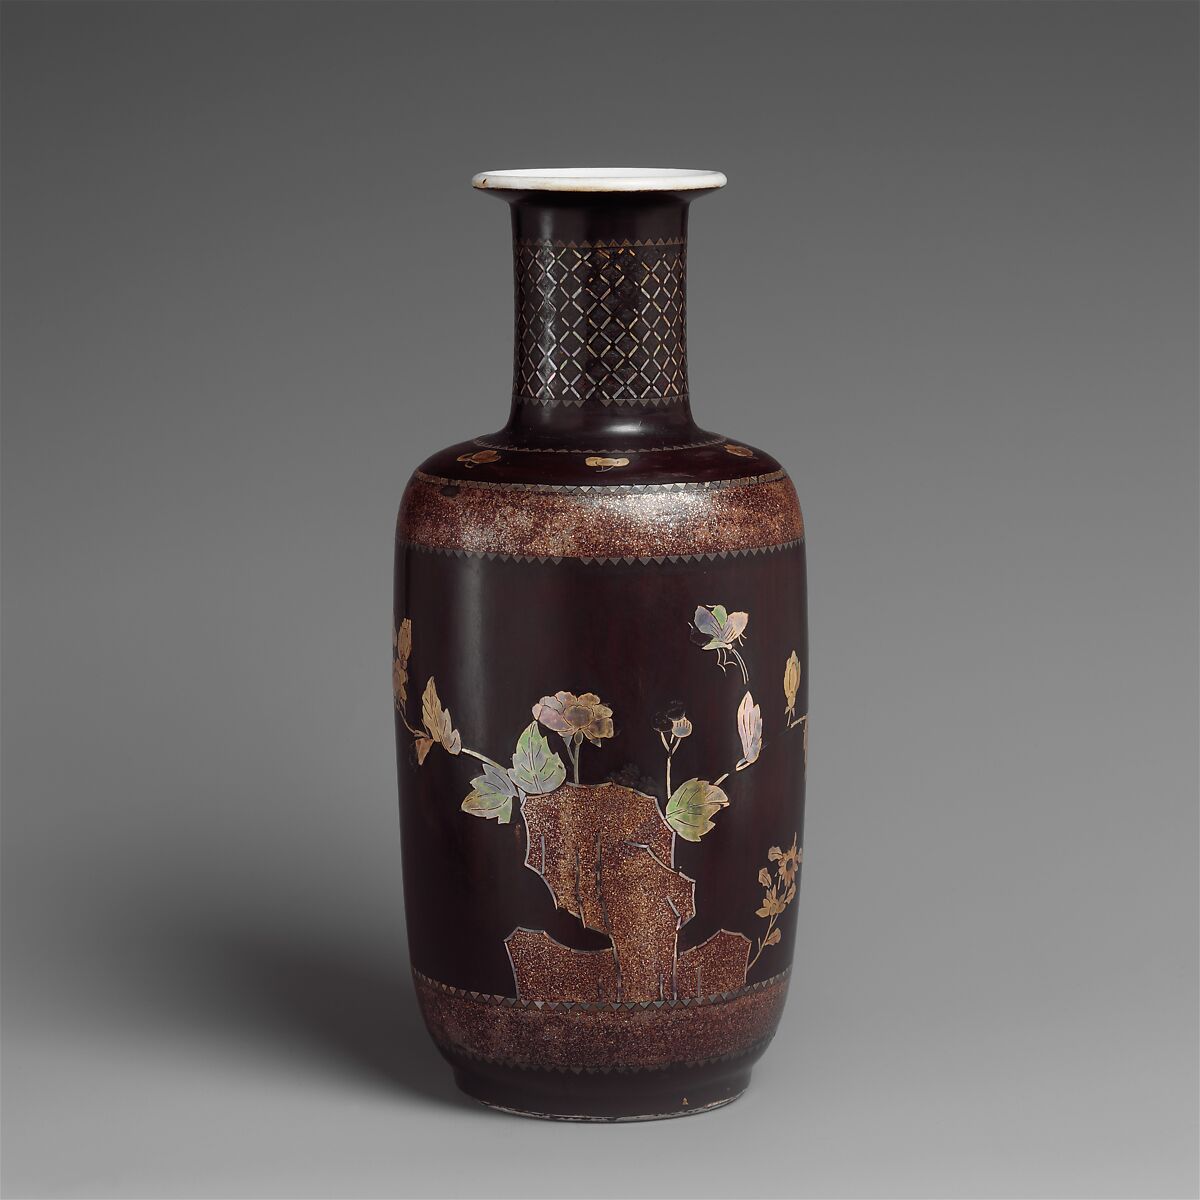 Vase with decoration of rocks, flowers, and butterflies, Black lacquer over porcelain,  inlaid with mother-of-pearl, China 